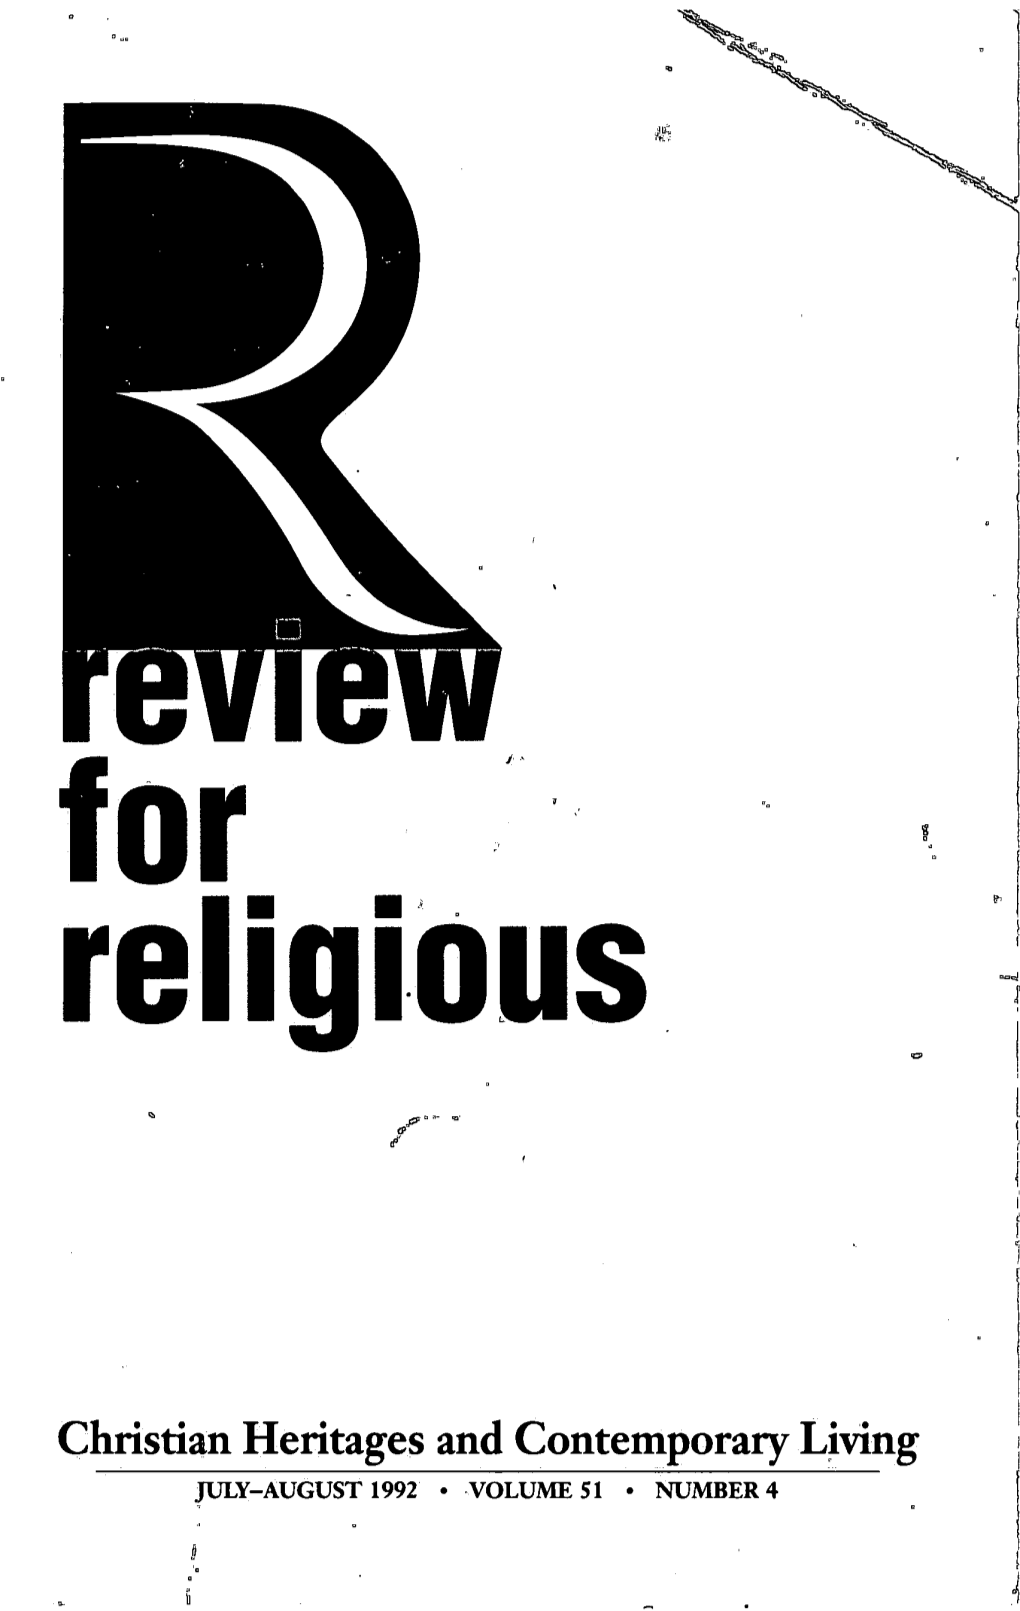 For Religious (ISSN 0034-639X) Is Published Bi-Monthly at Saint Louis University by the Jesuits of the Missouri Province